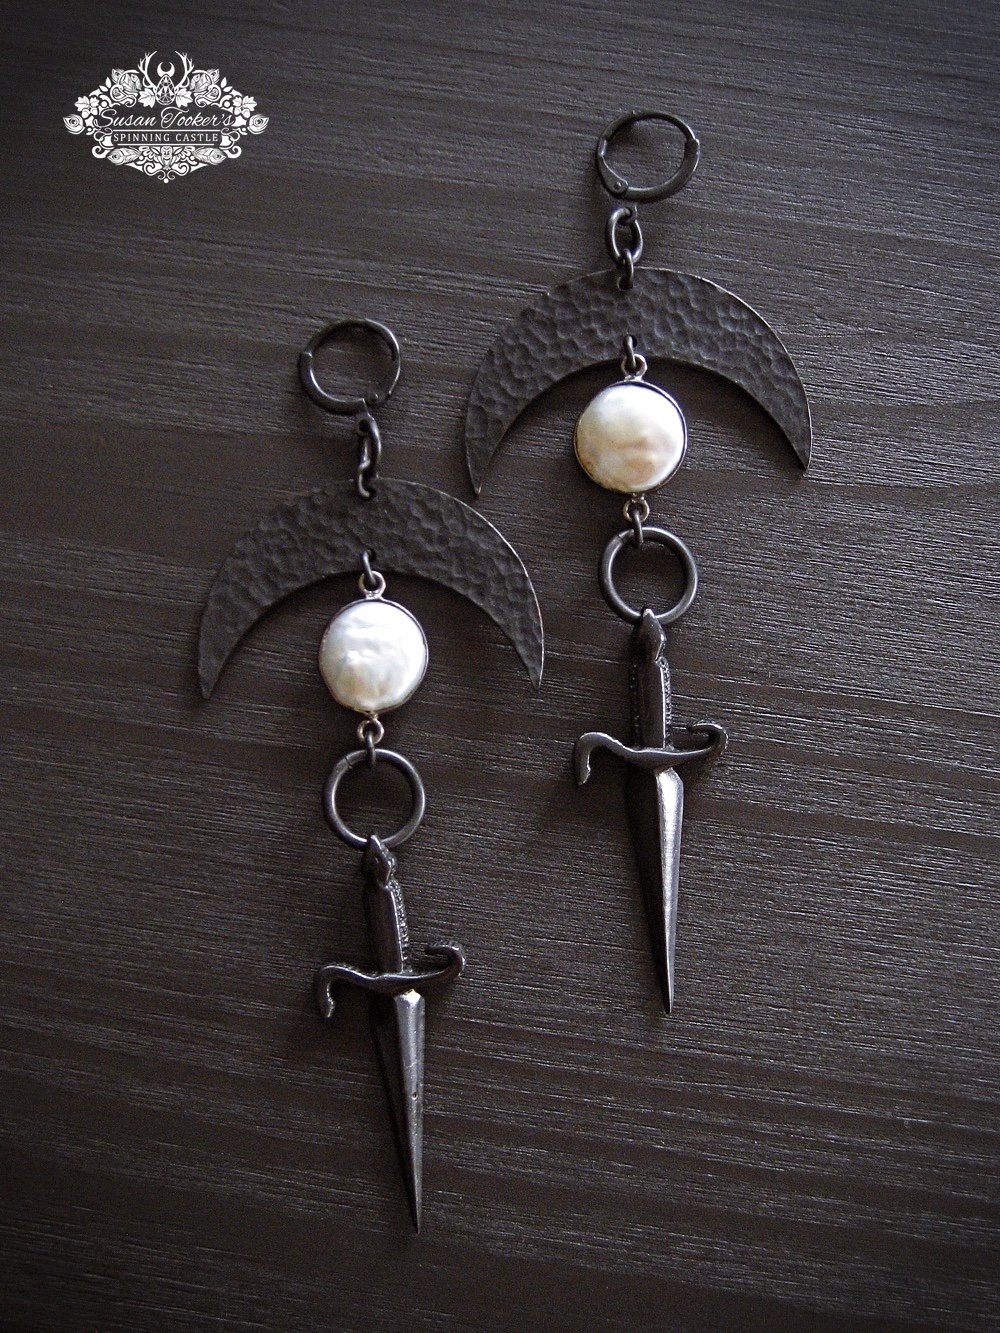 Image of ATHAME - Crescent Moon Sword Dagger Freshwater Pearl Drop Earrings Boho Witch Dark Dangle